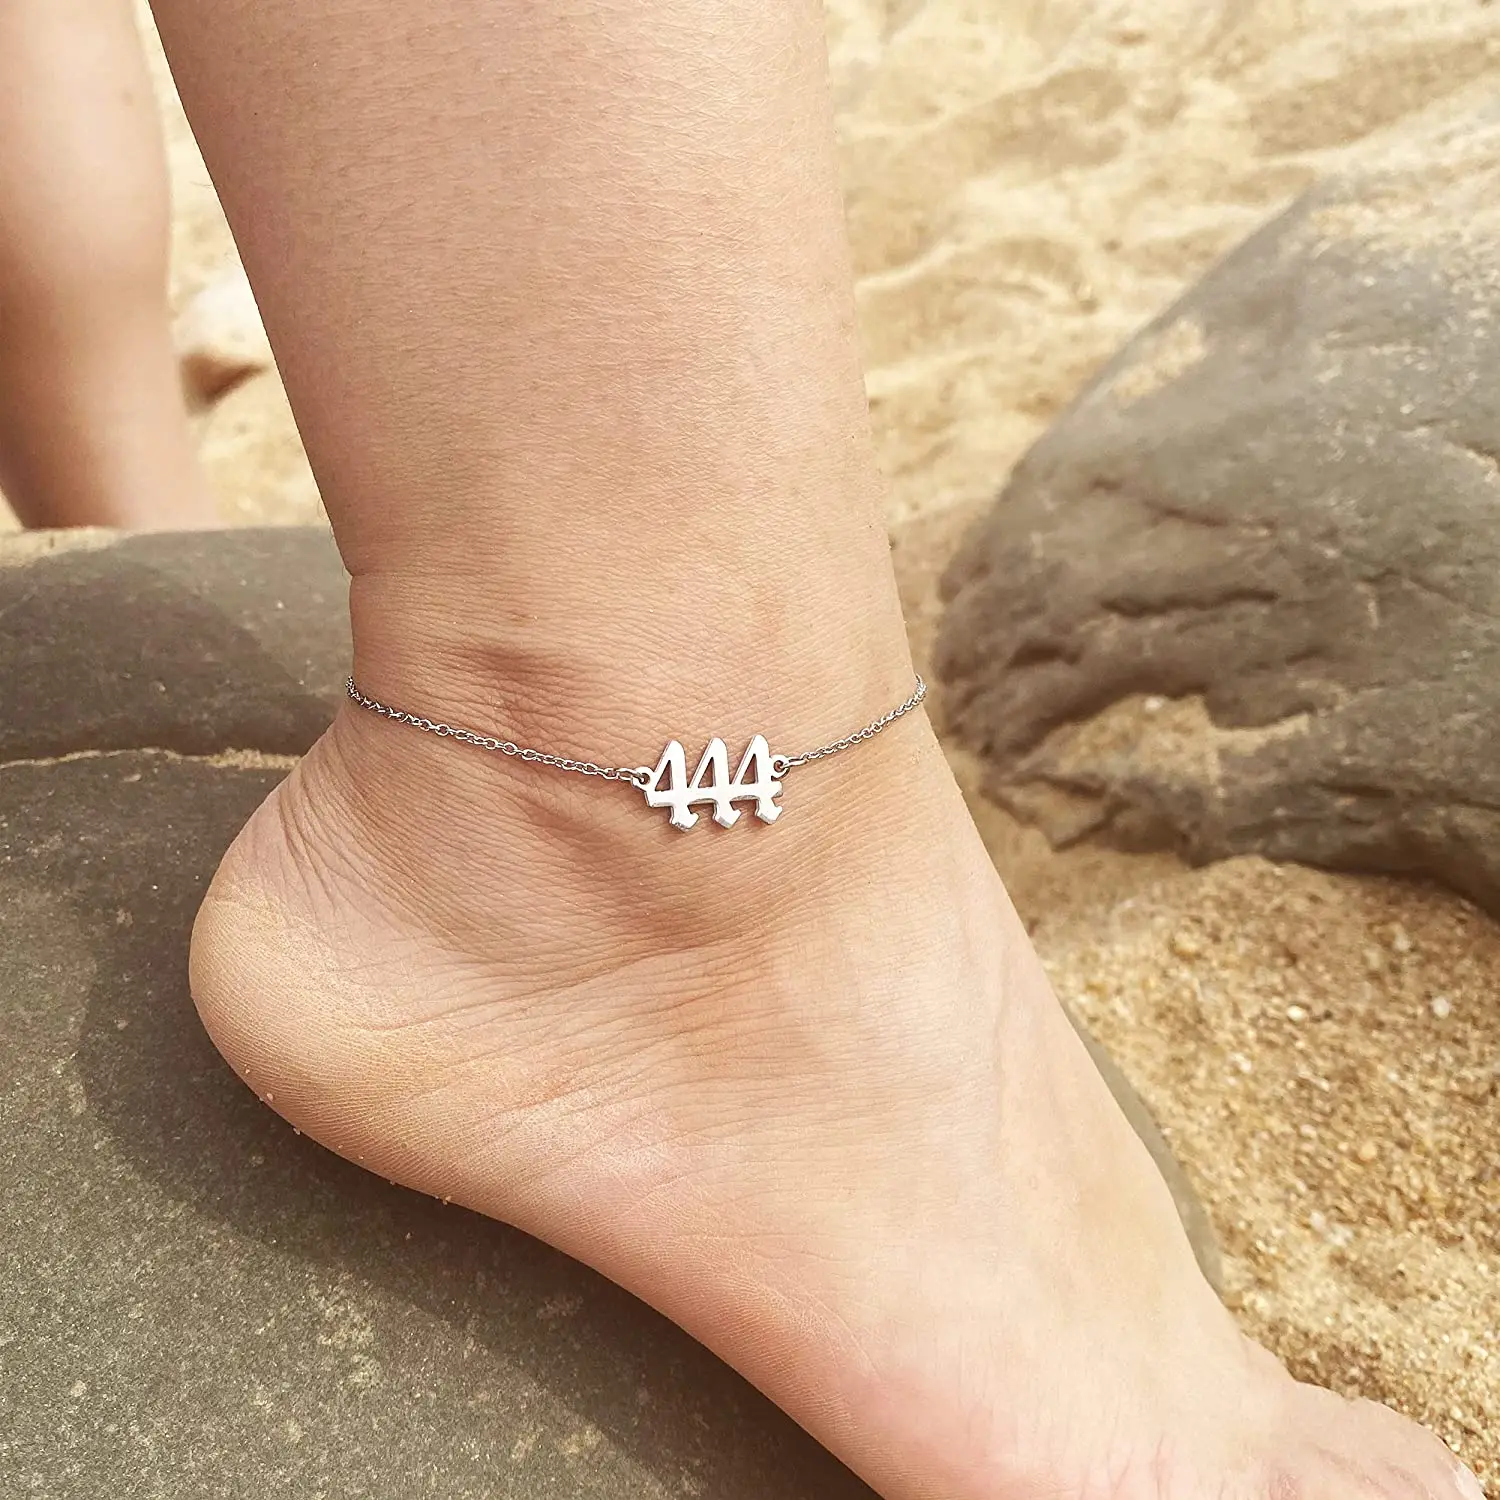 

Devil Angel Number 111 222 333 444 555 777 888 999 666 Anklets For Women Gold Ankle Bracelet Boho Jewelry Beach Accessories